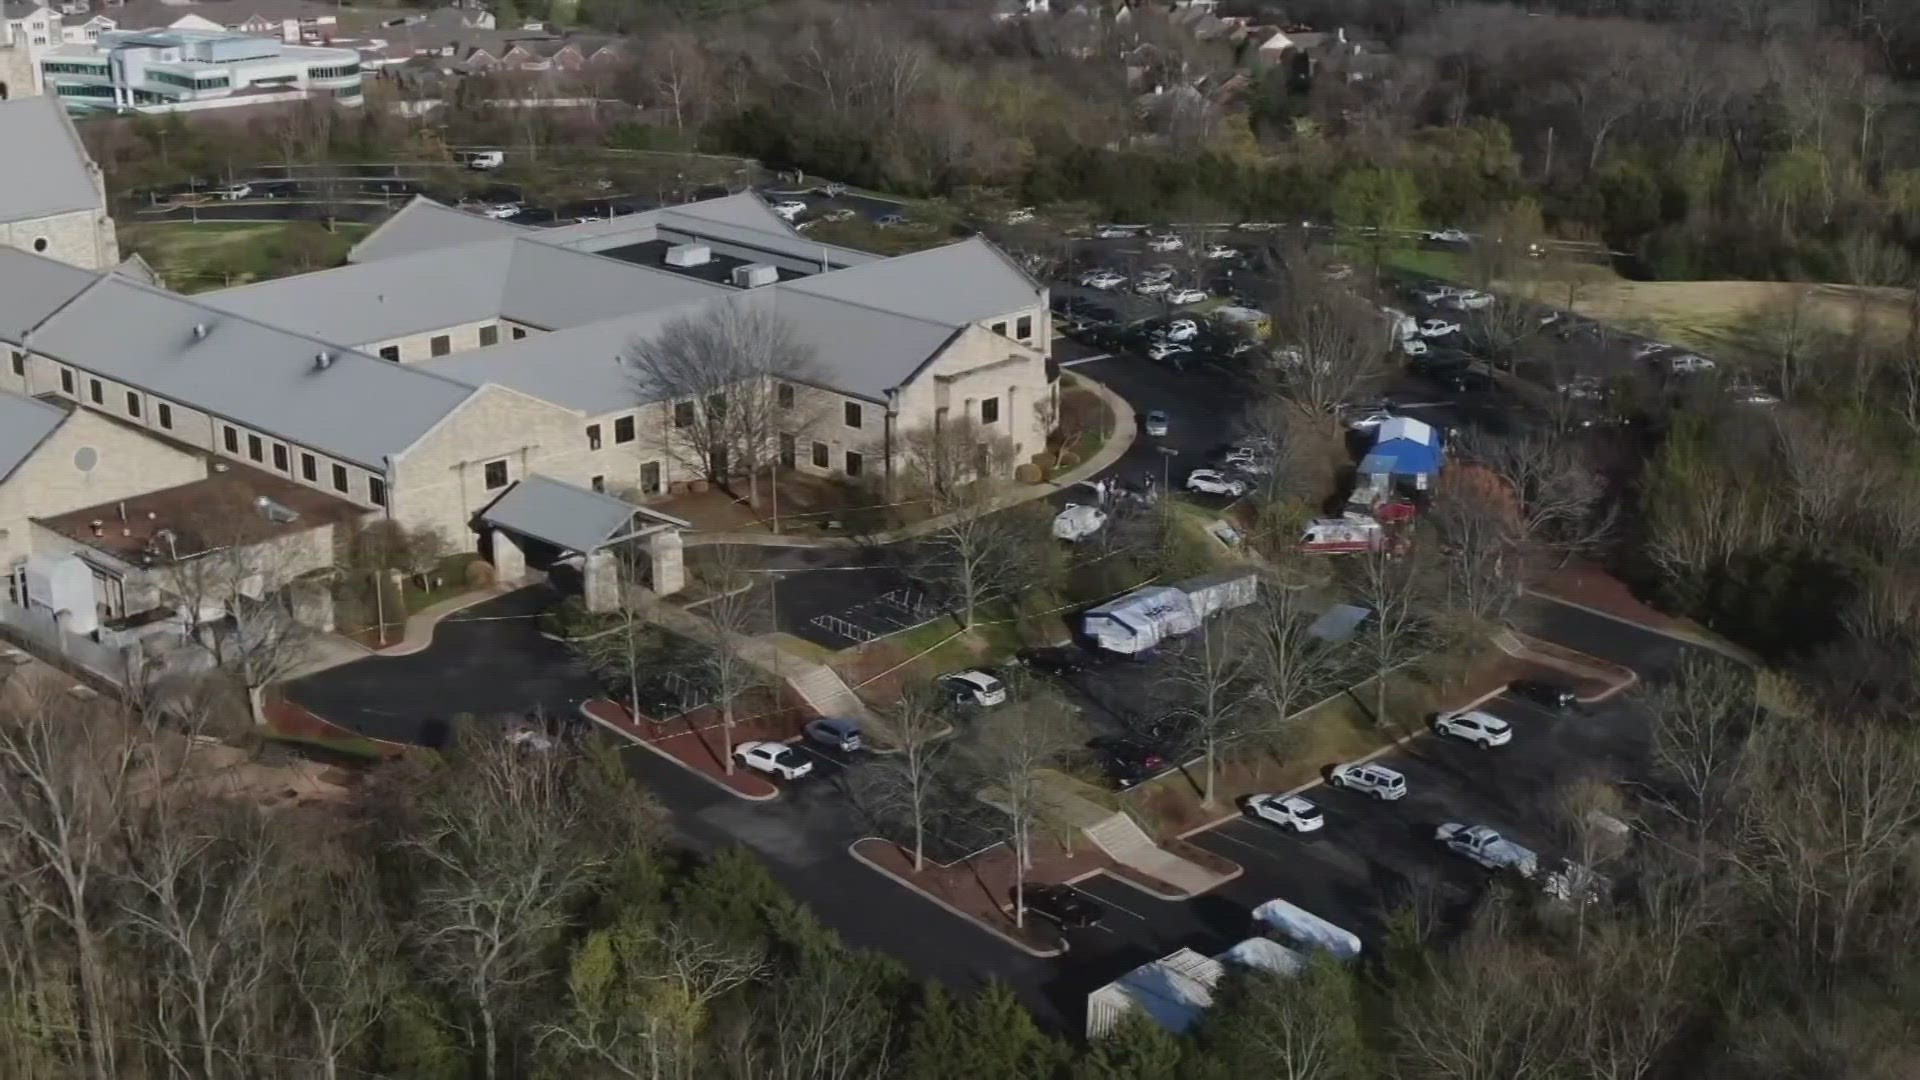 Ownership of the writings of a shooter who killed six people at a Nashville school will be transferred to the families of students at the school.